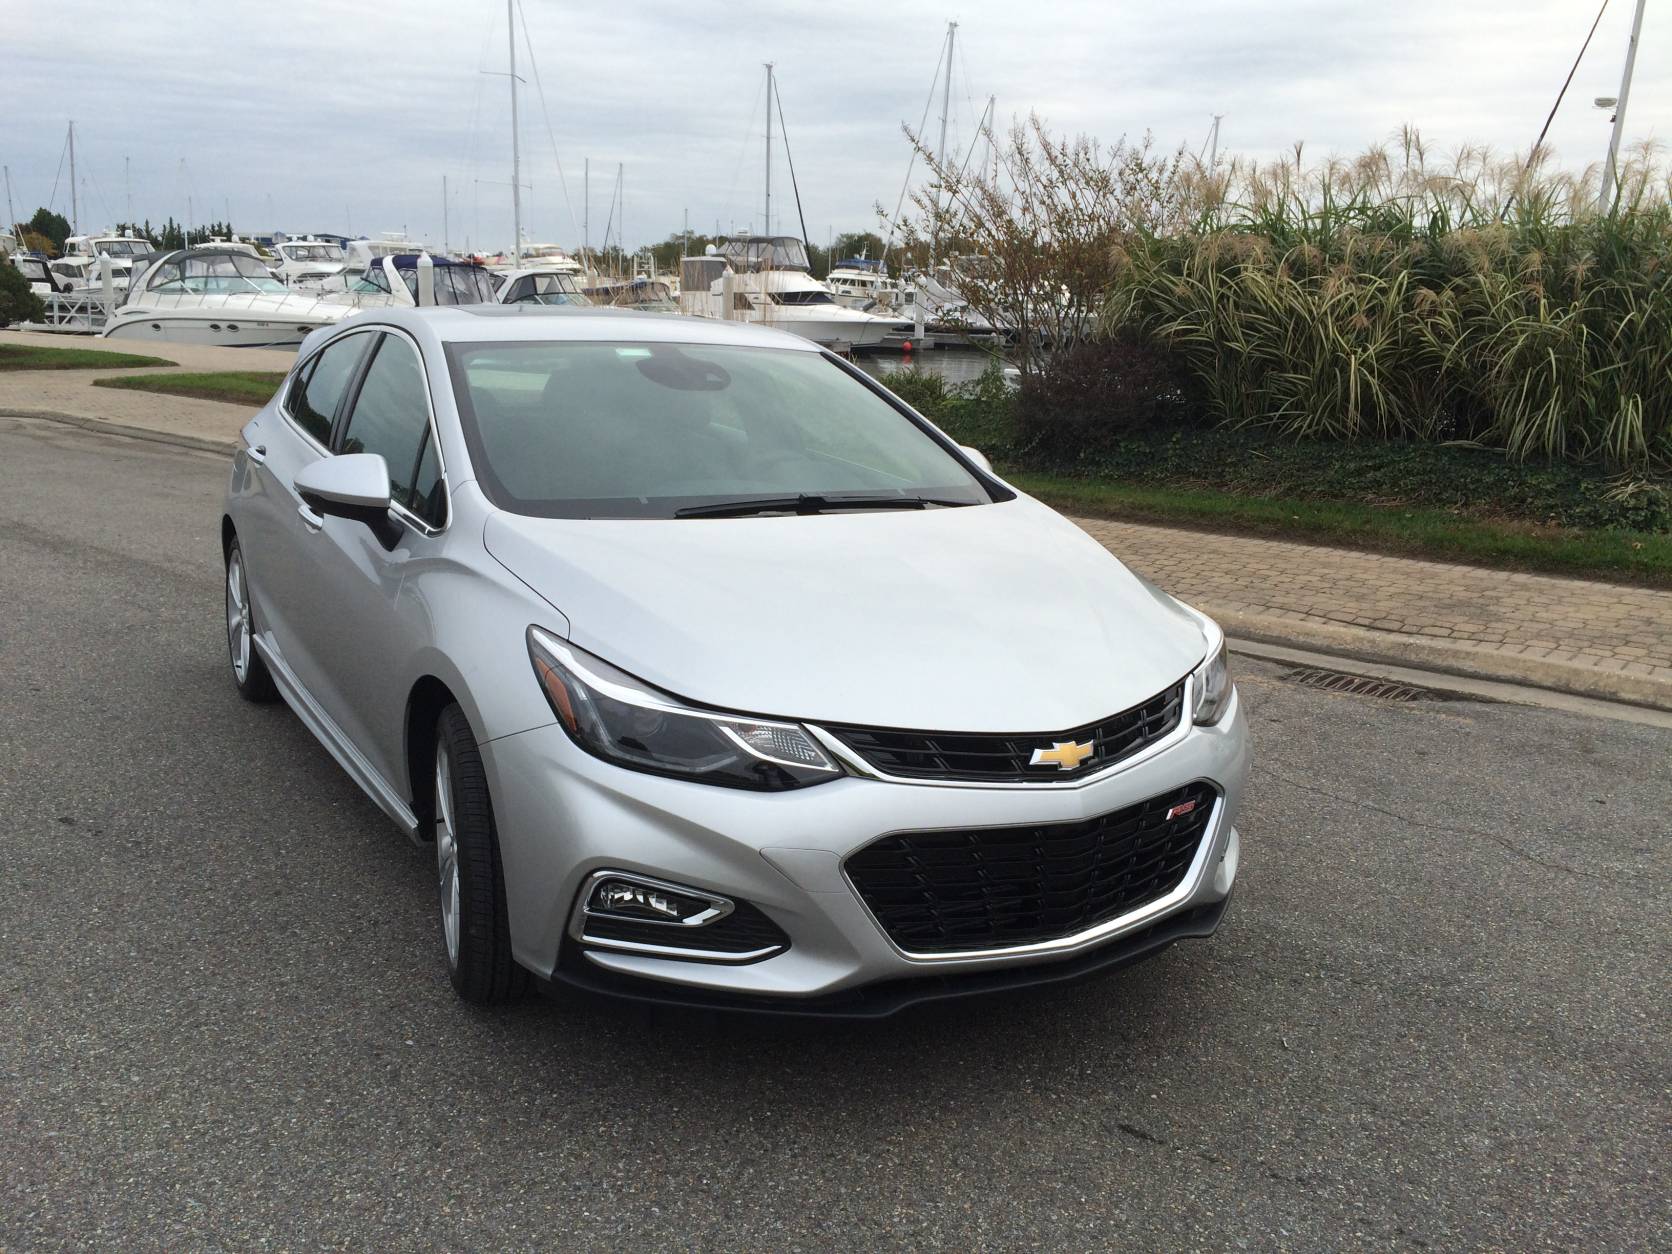 The new Chevrolet Cruze feels quicker with less turbo lag than before, making for a more enjoyable driving experience. (WTOP/Mike Parris)